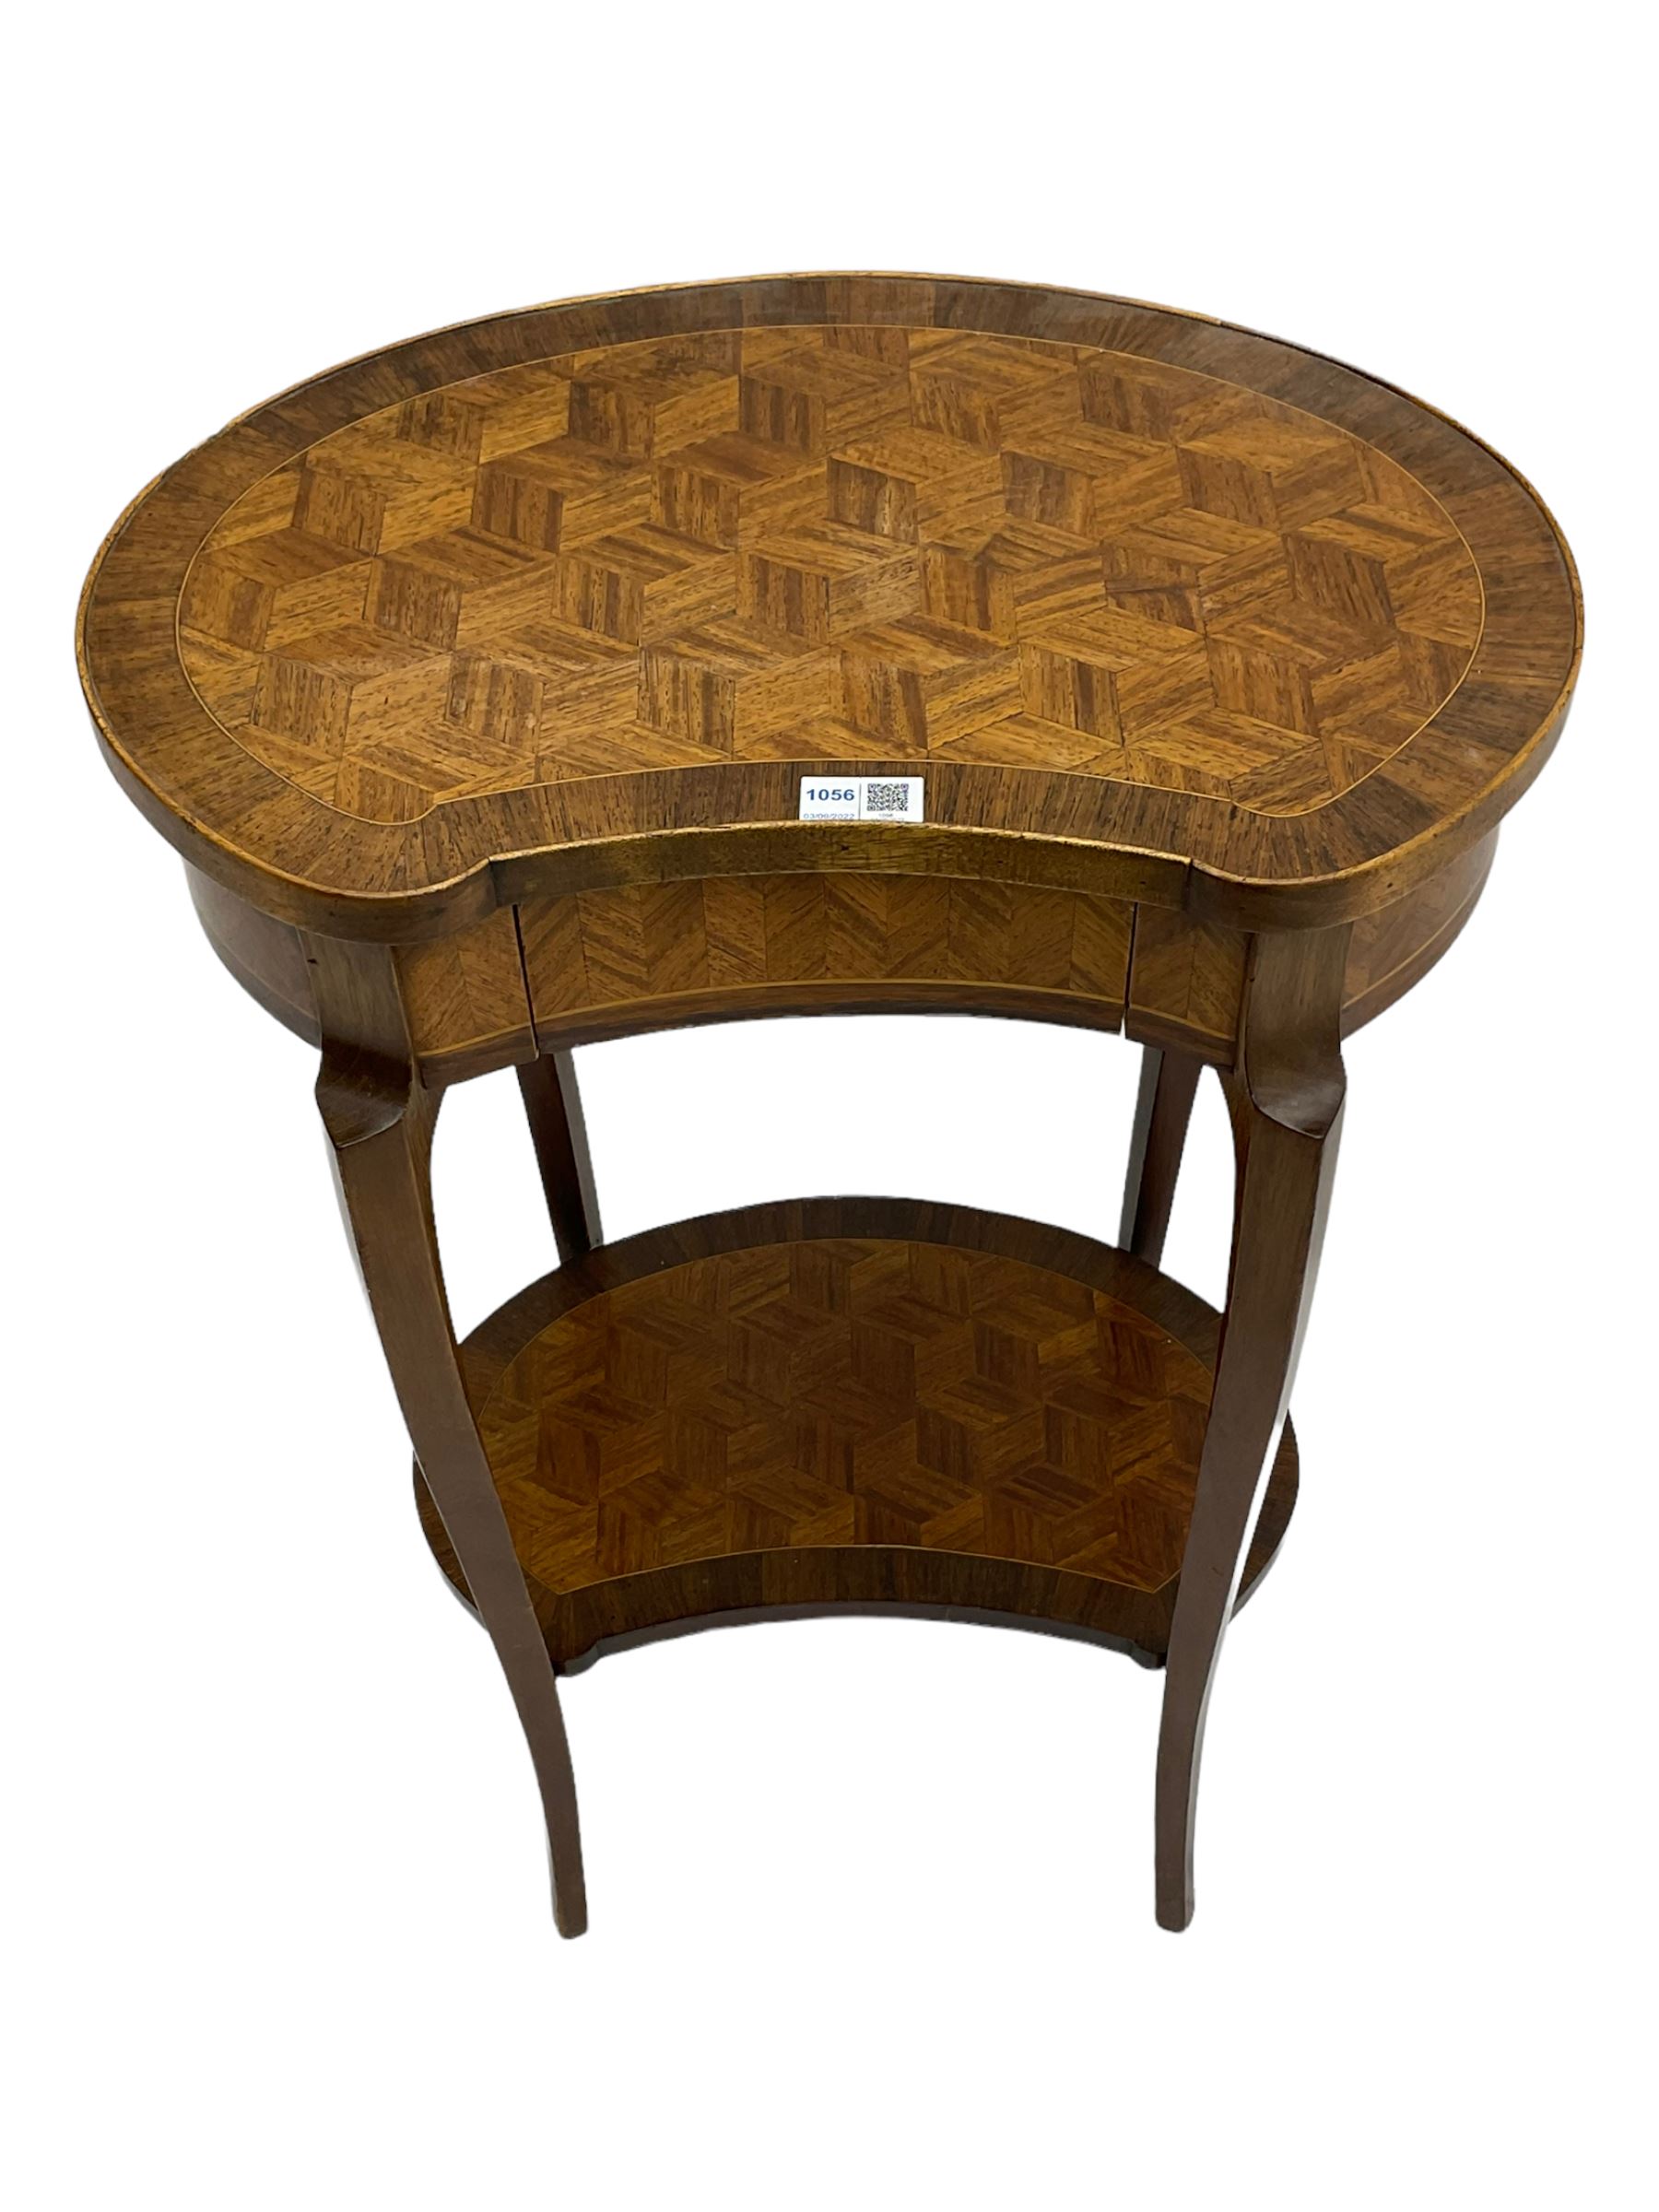 French style walnut parquetry kidney shaped table - Image 4 of 5